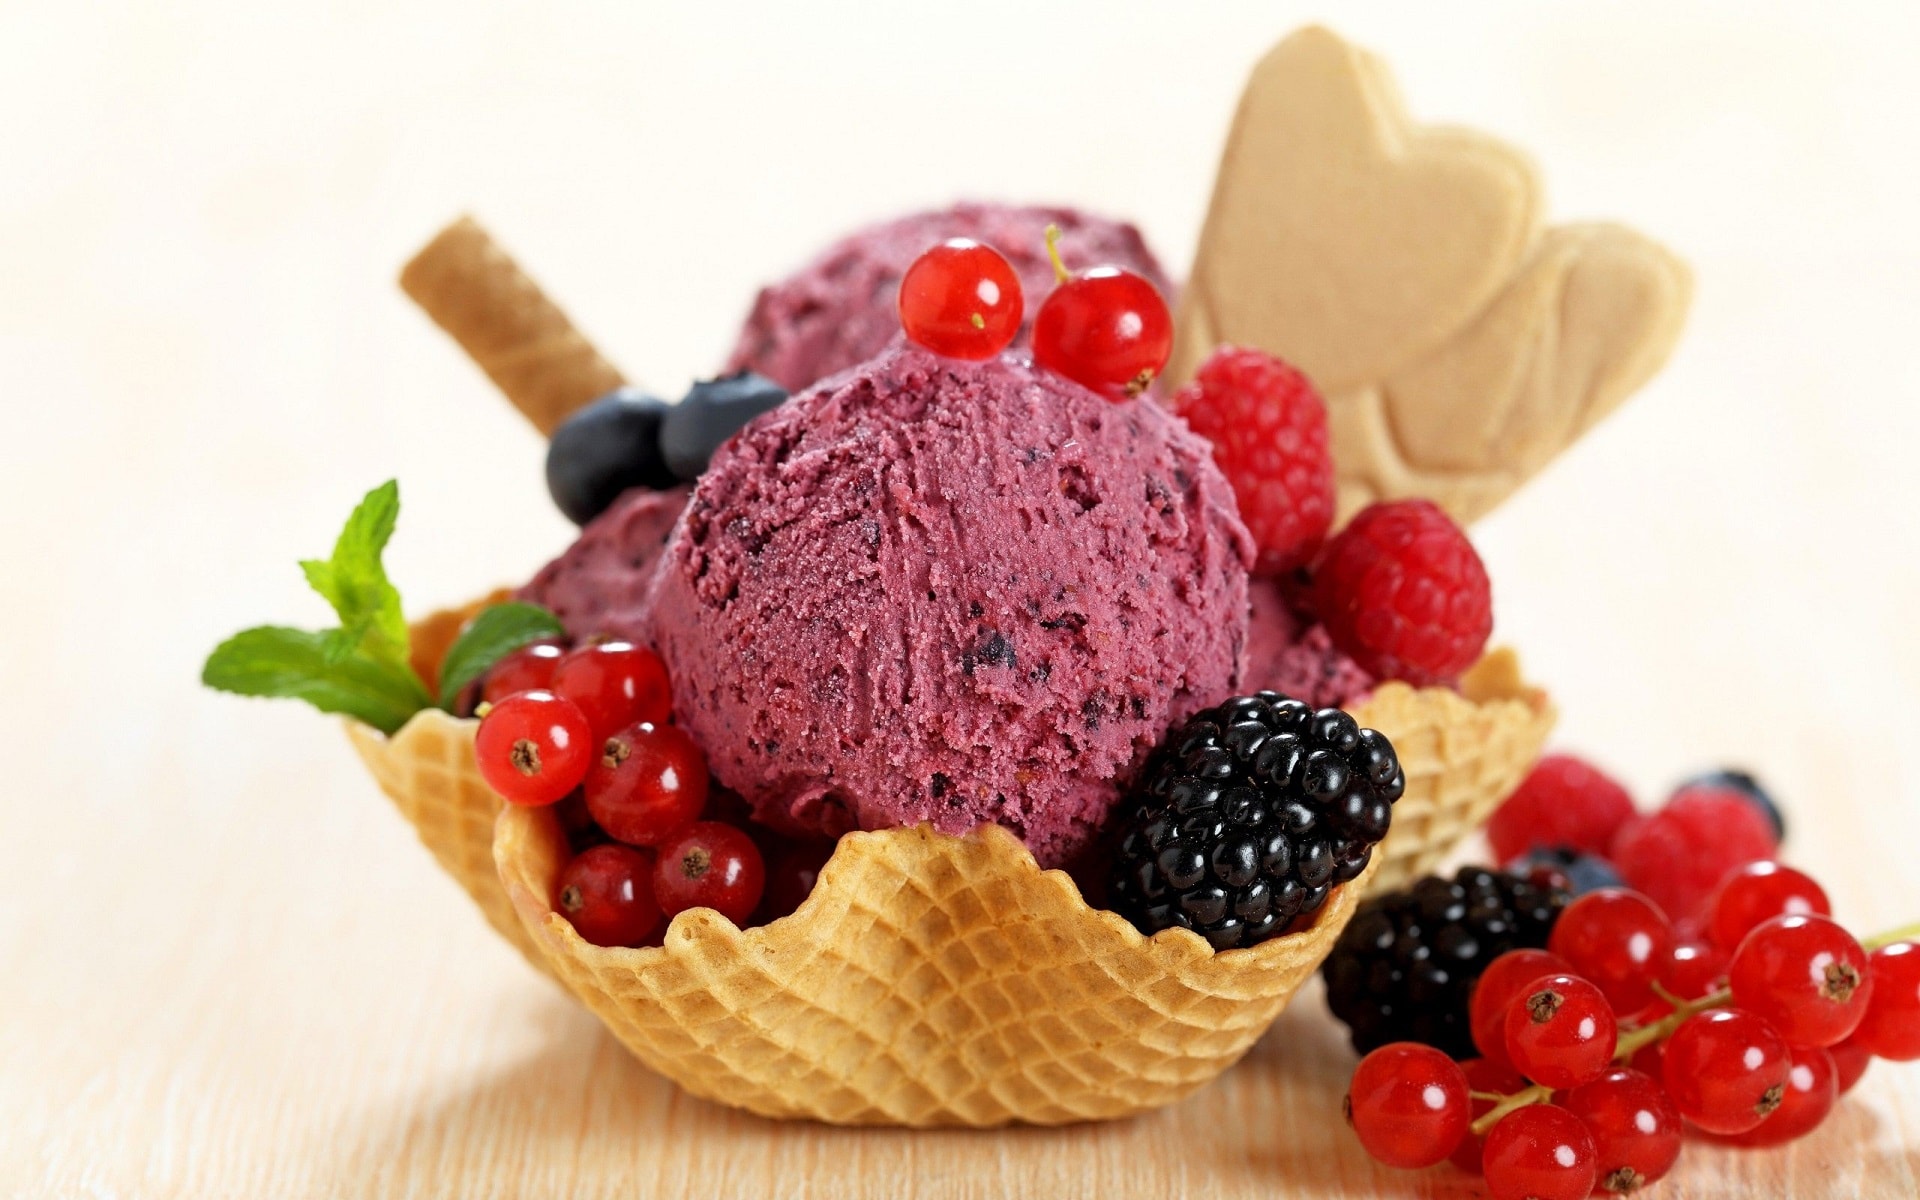 Cream - foods to avoid in weight loss